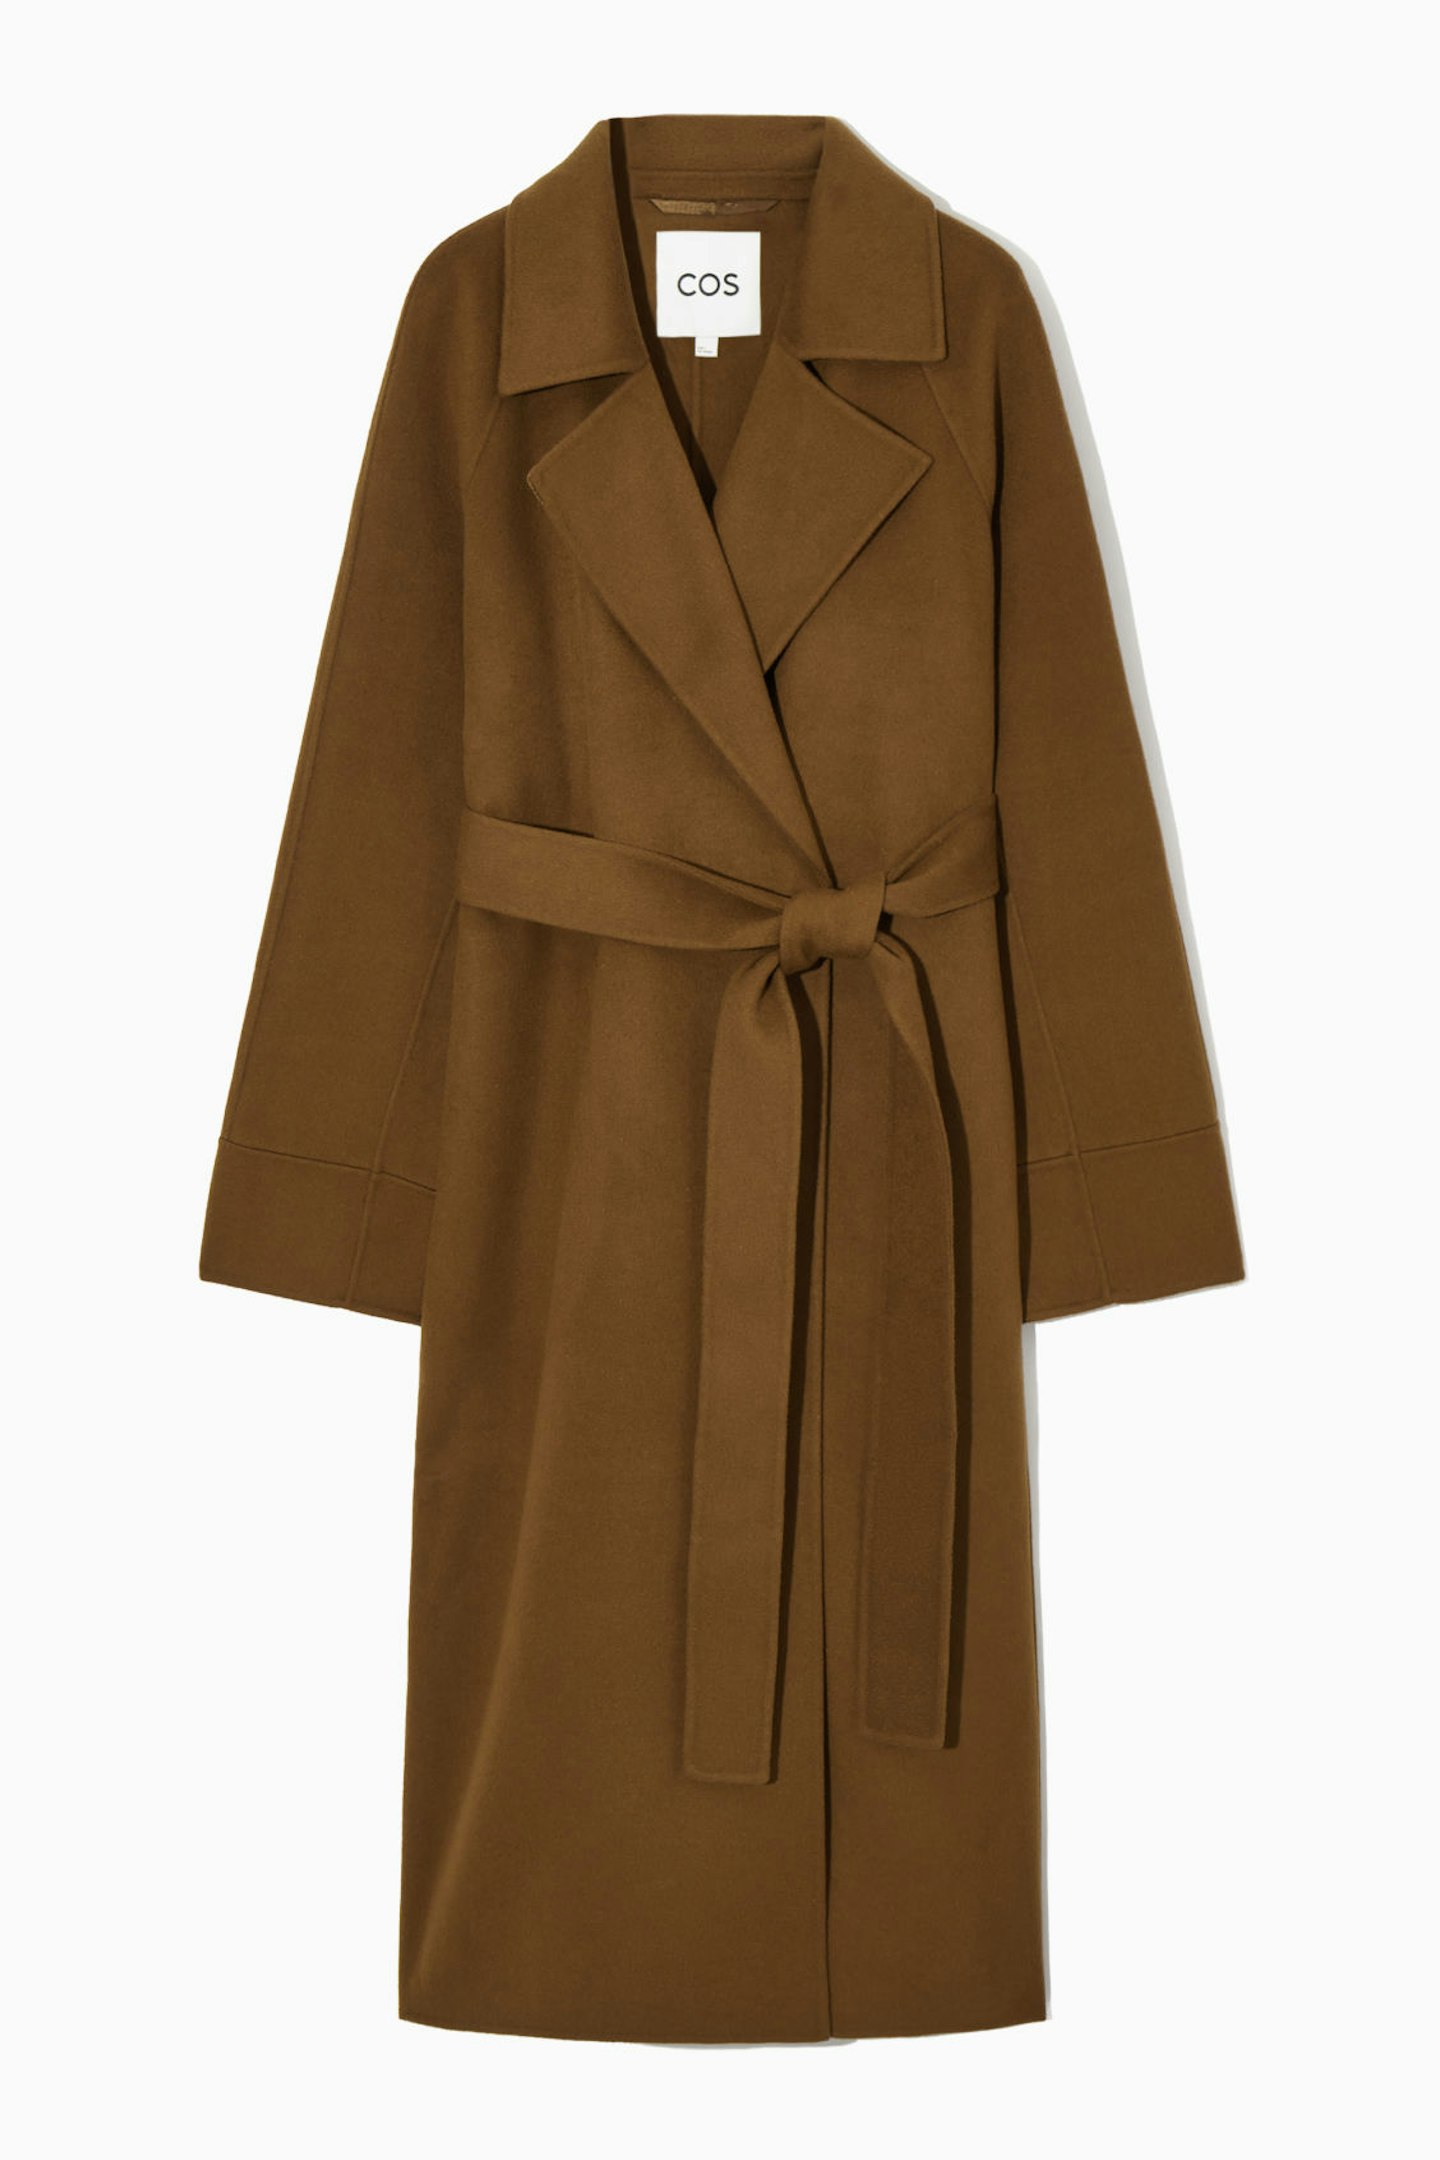 COS, Belted Double-Faced Wool Coat